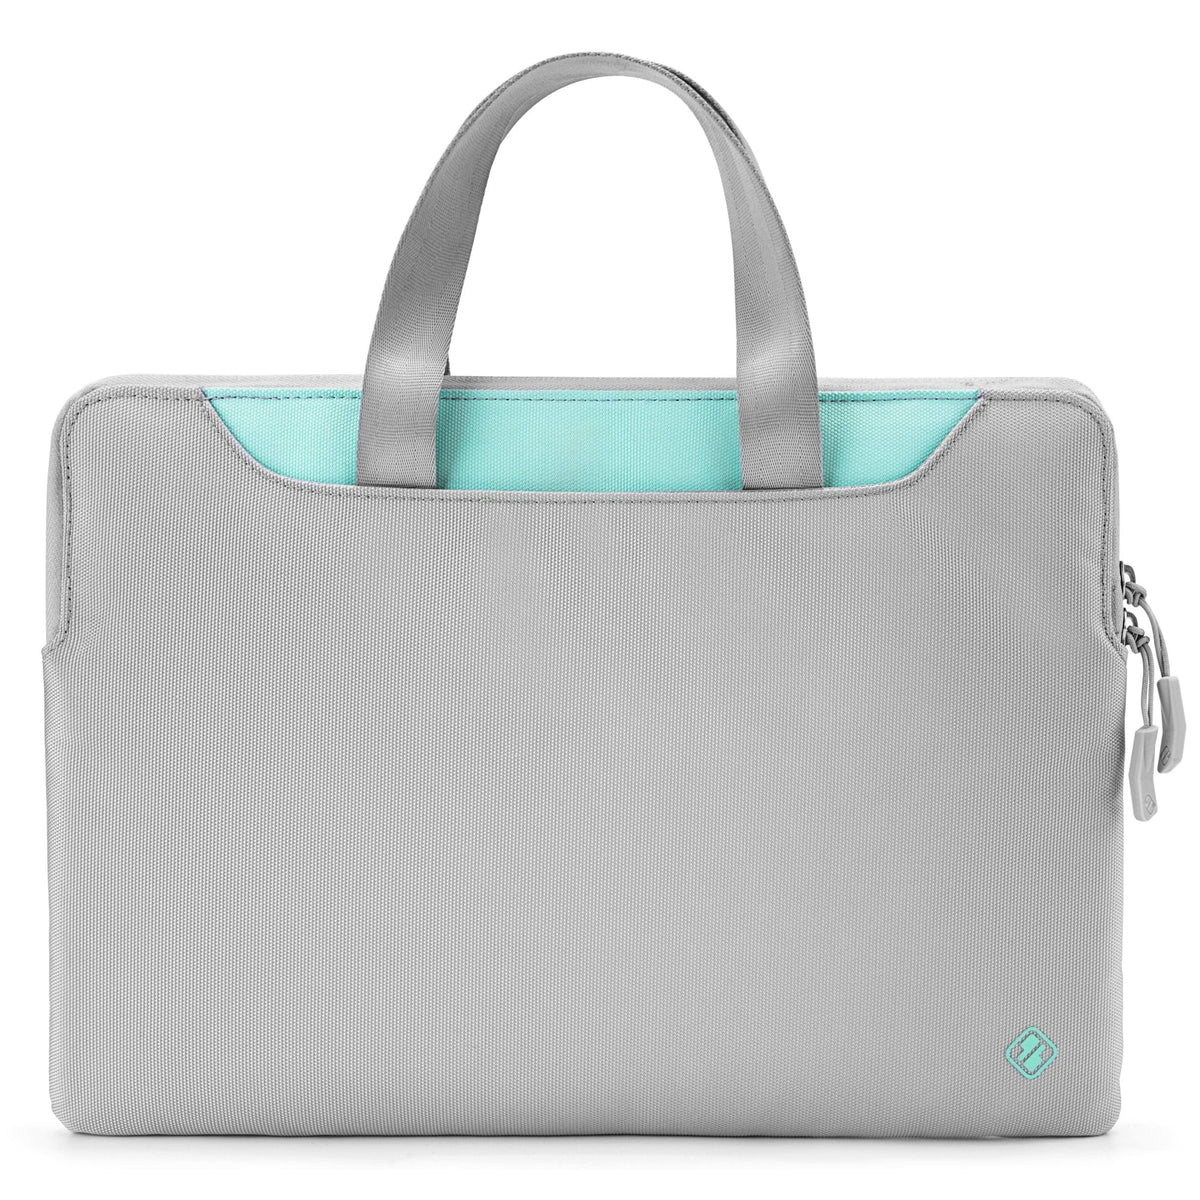 TheHer-A21 Laptop Handbag for 13.3 inch MacBook Air | Silver